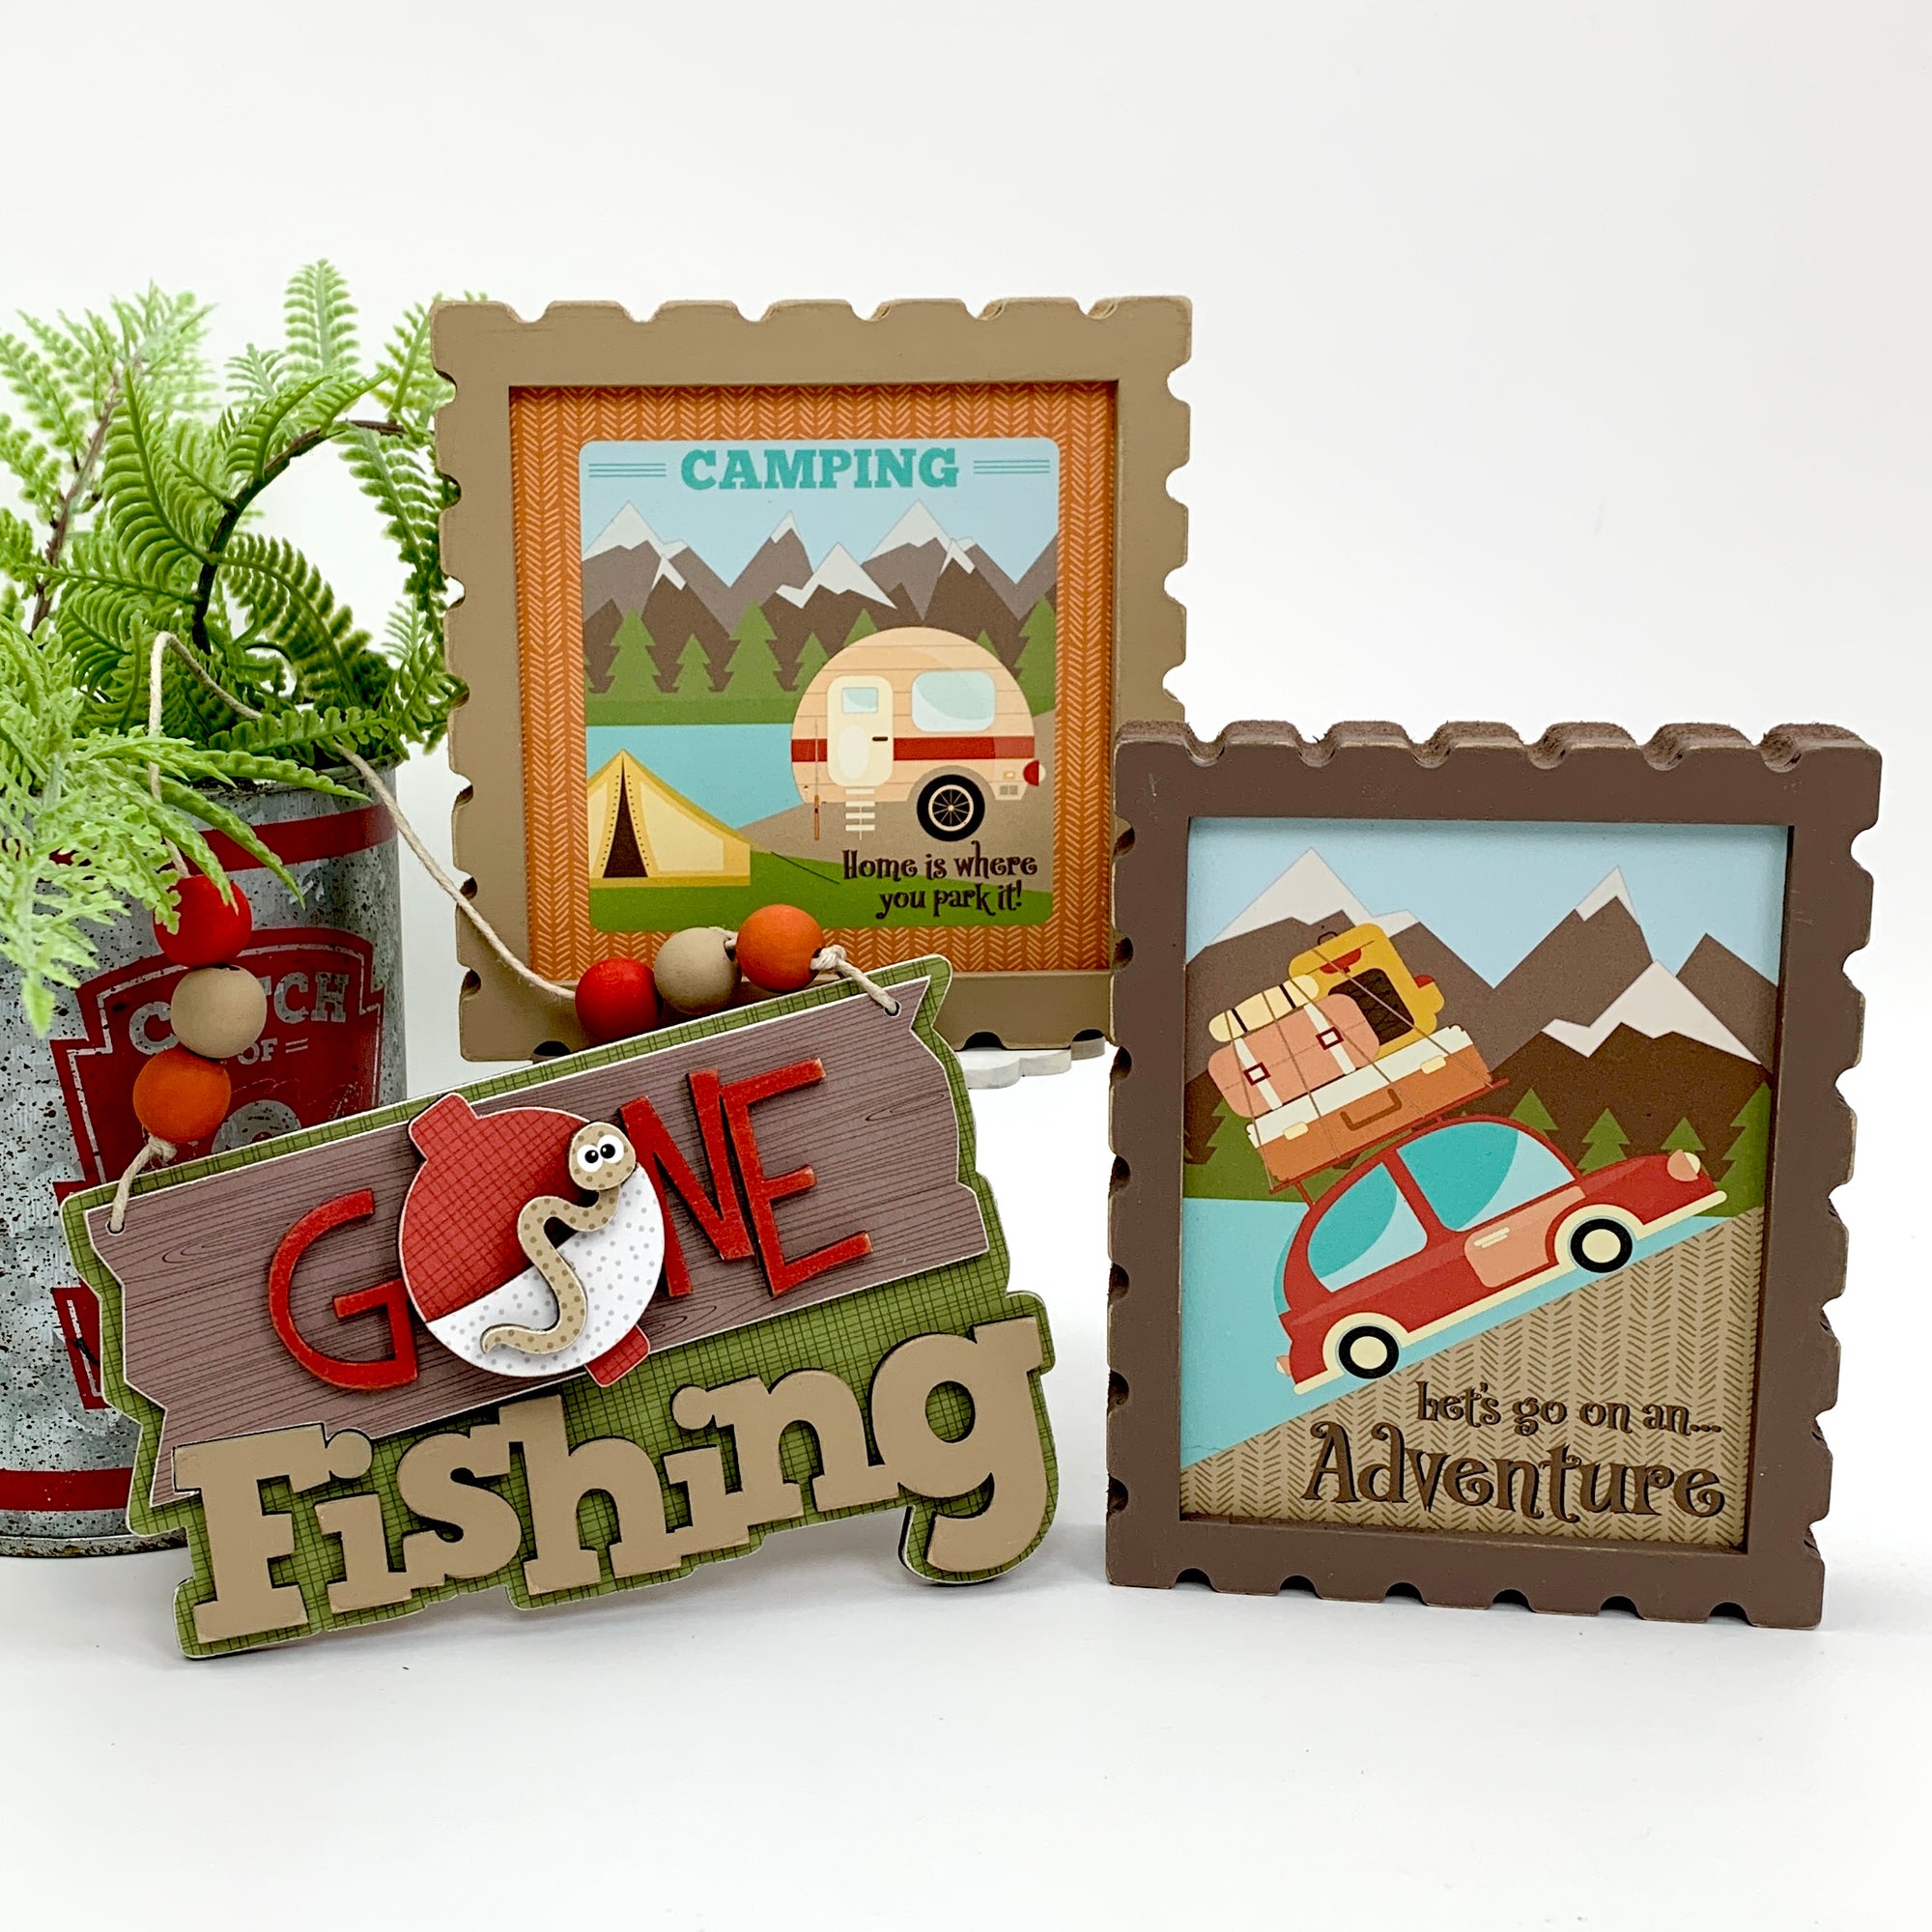 Gone fishing sign with a camping sign and let's go on an adventure sign for outdoor and camping tiered tray decorating